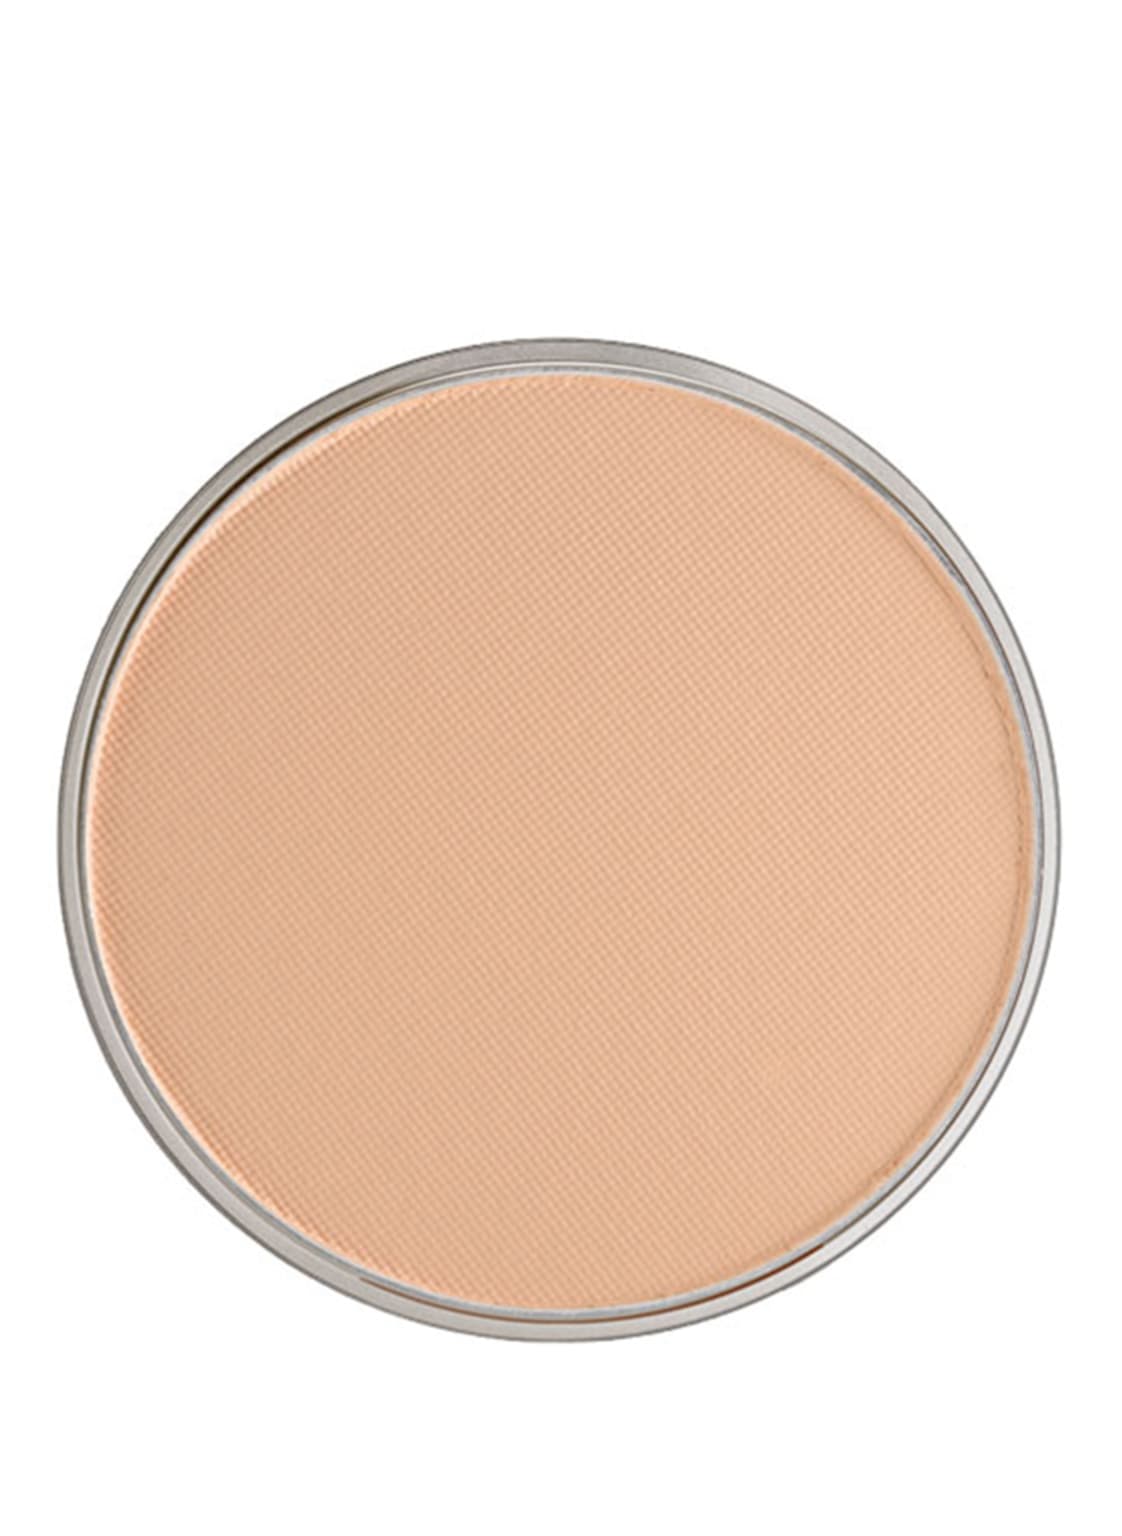 Image of Artdeco Hydra Mineral Compact Foundation Refill Foundation